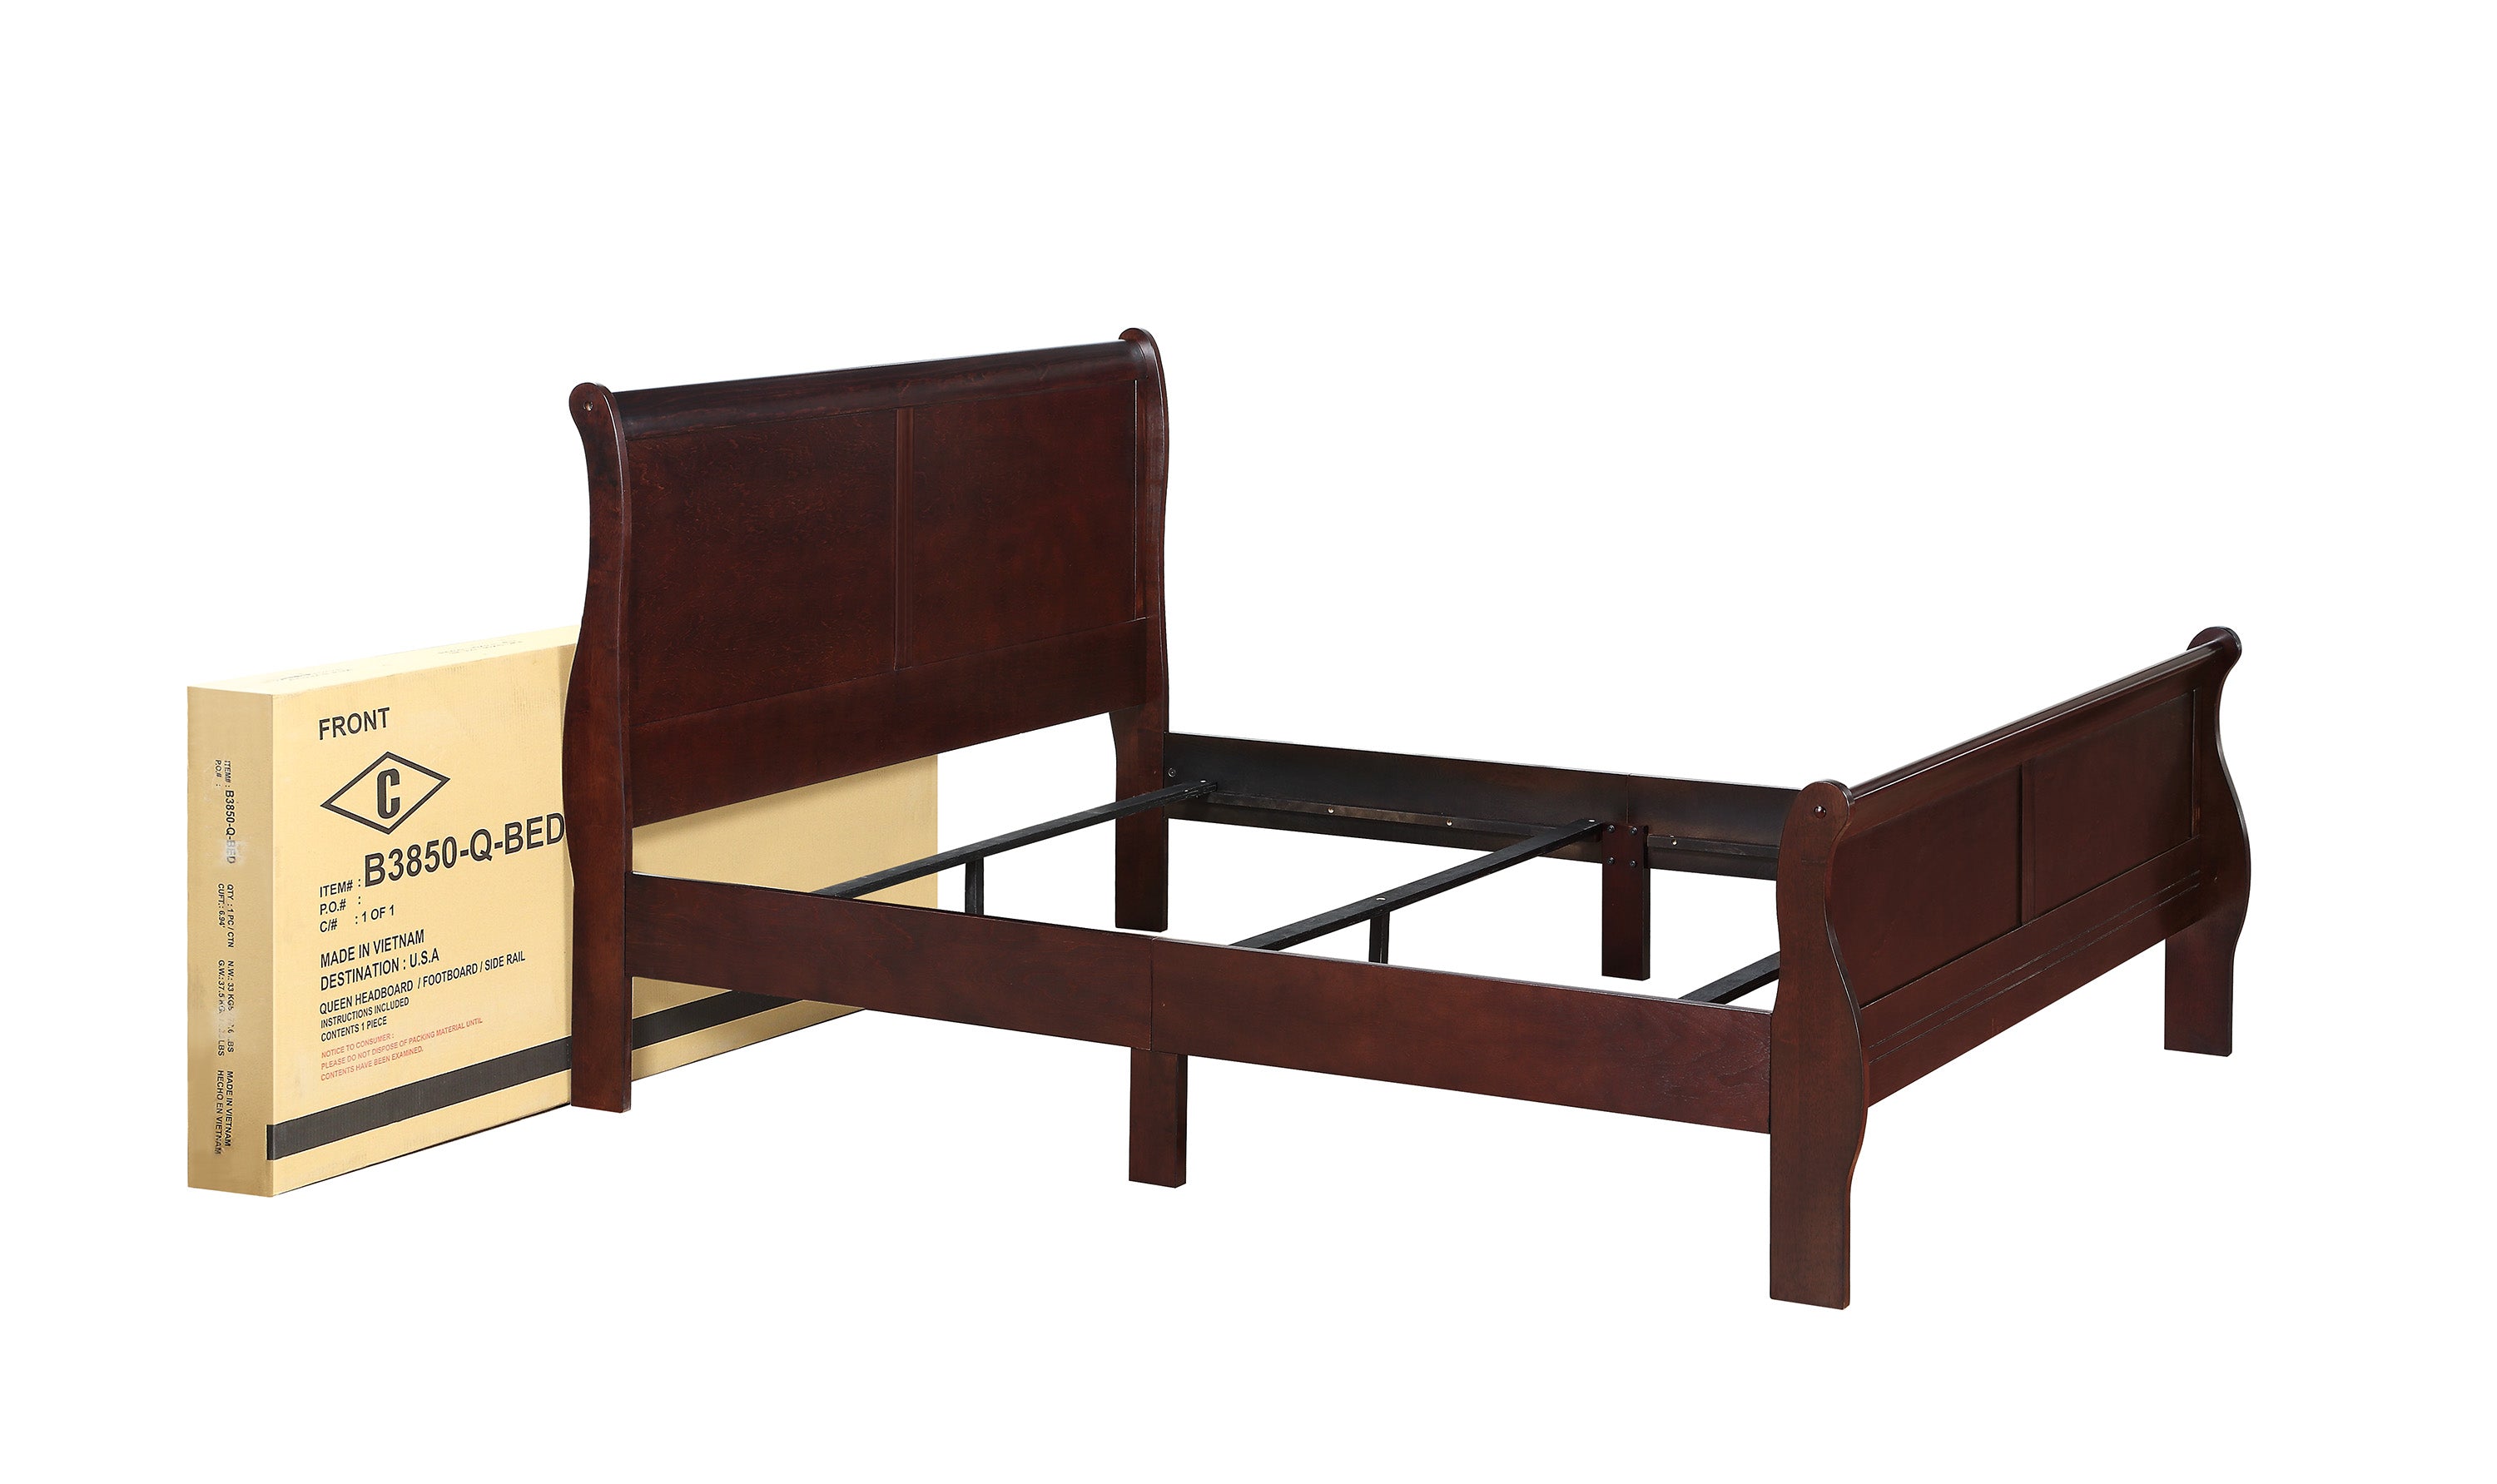 Louis Philippe - Sleigh Bed — Furniture Factory